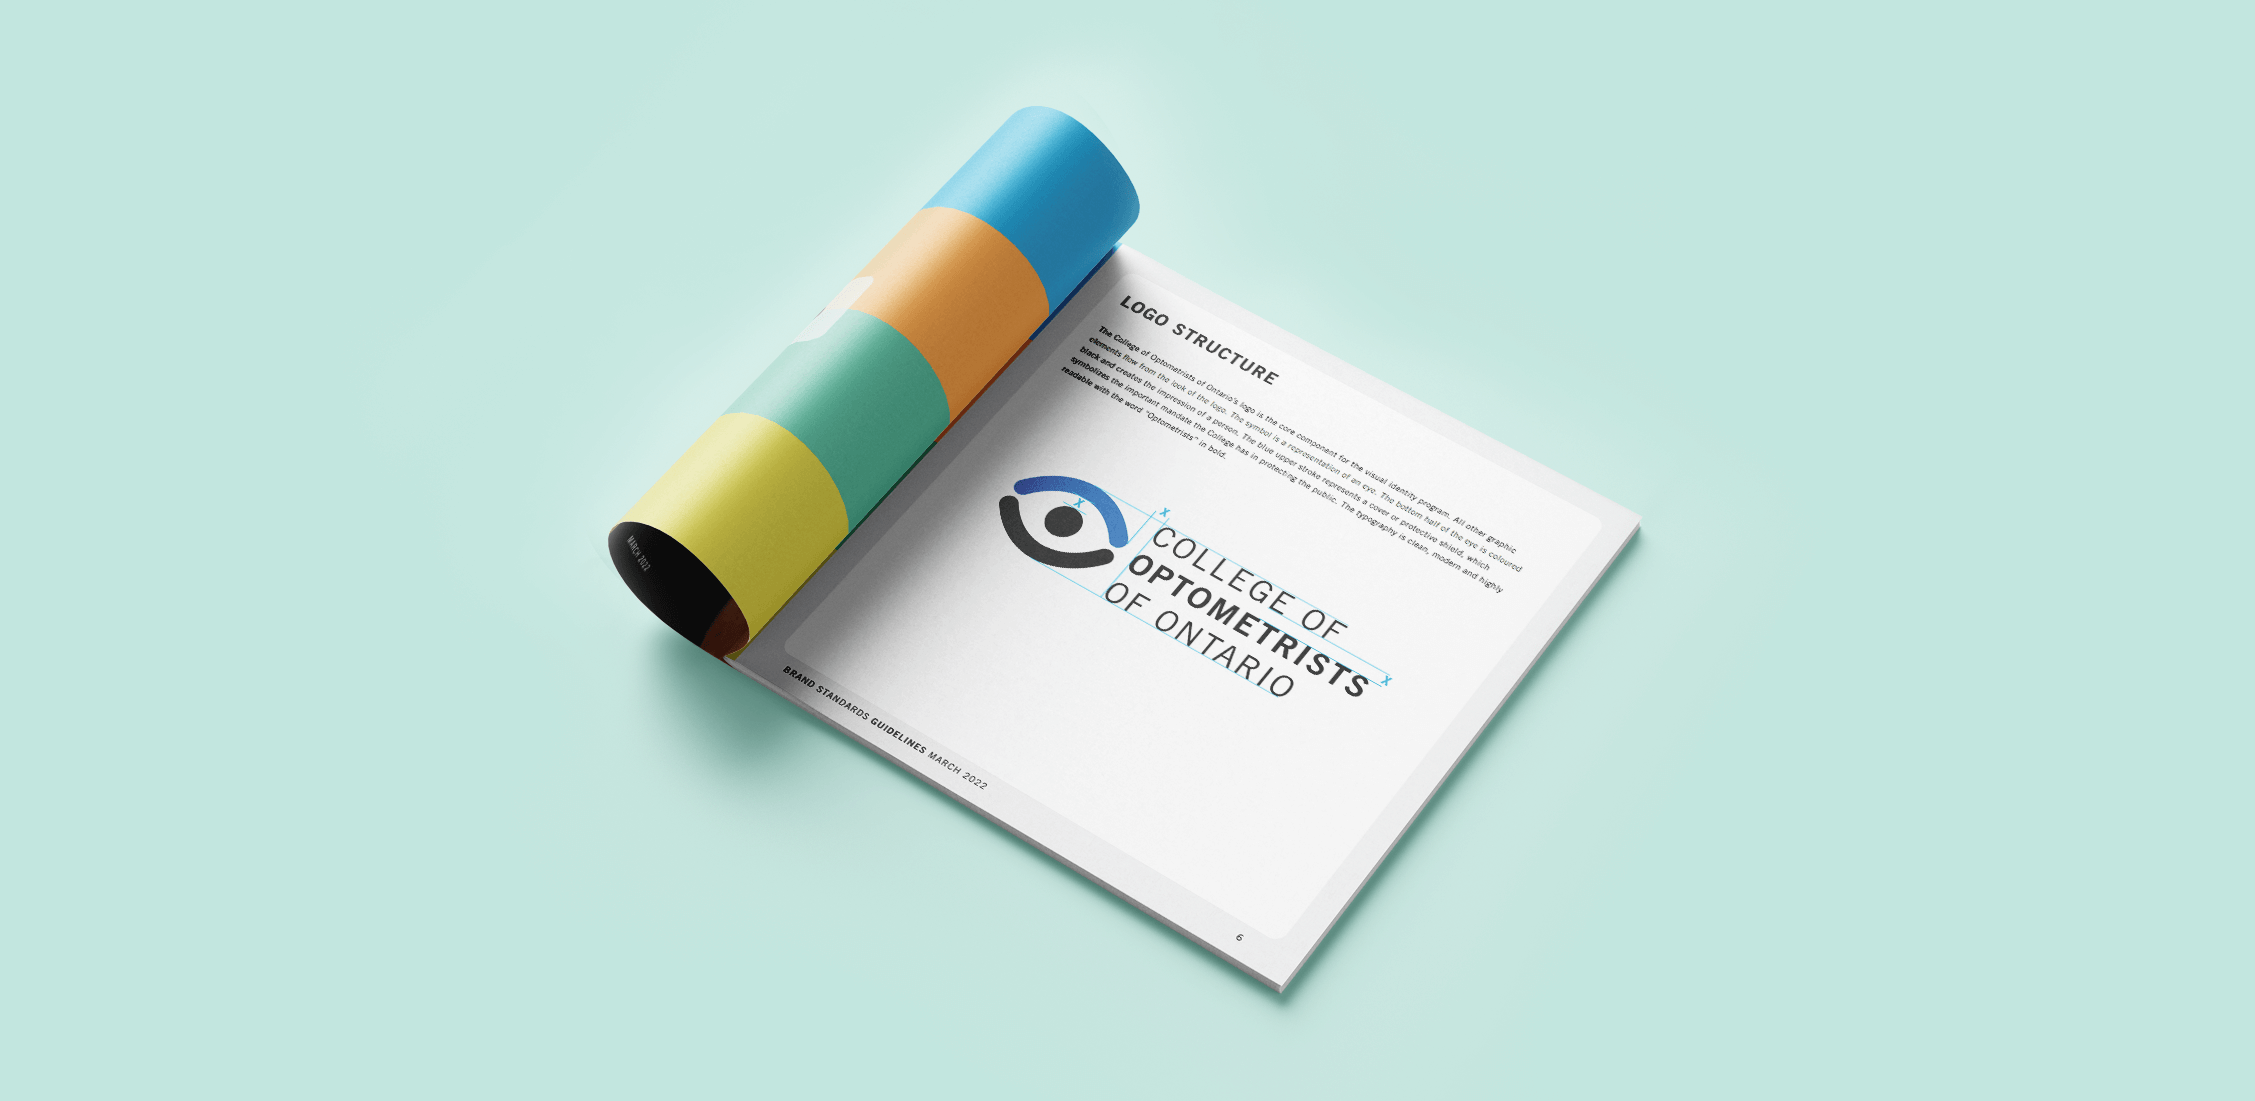 First page of the brand standards guide design for the College of Optometrist of Ontario.